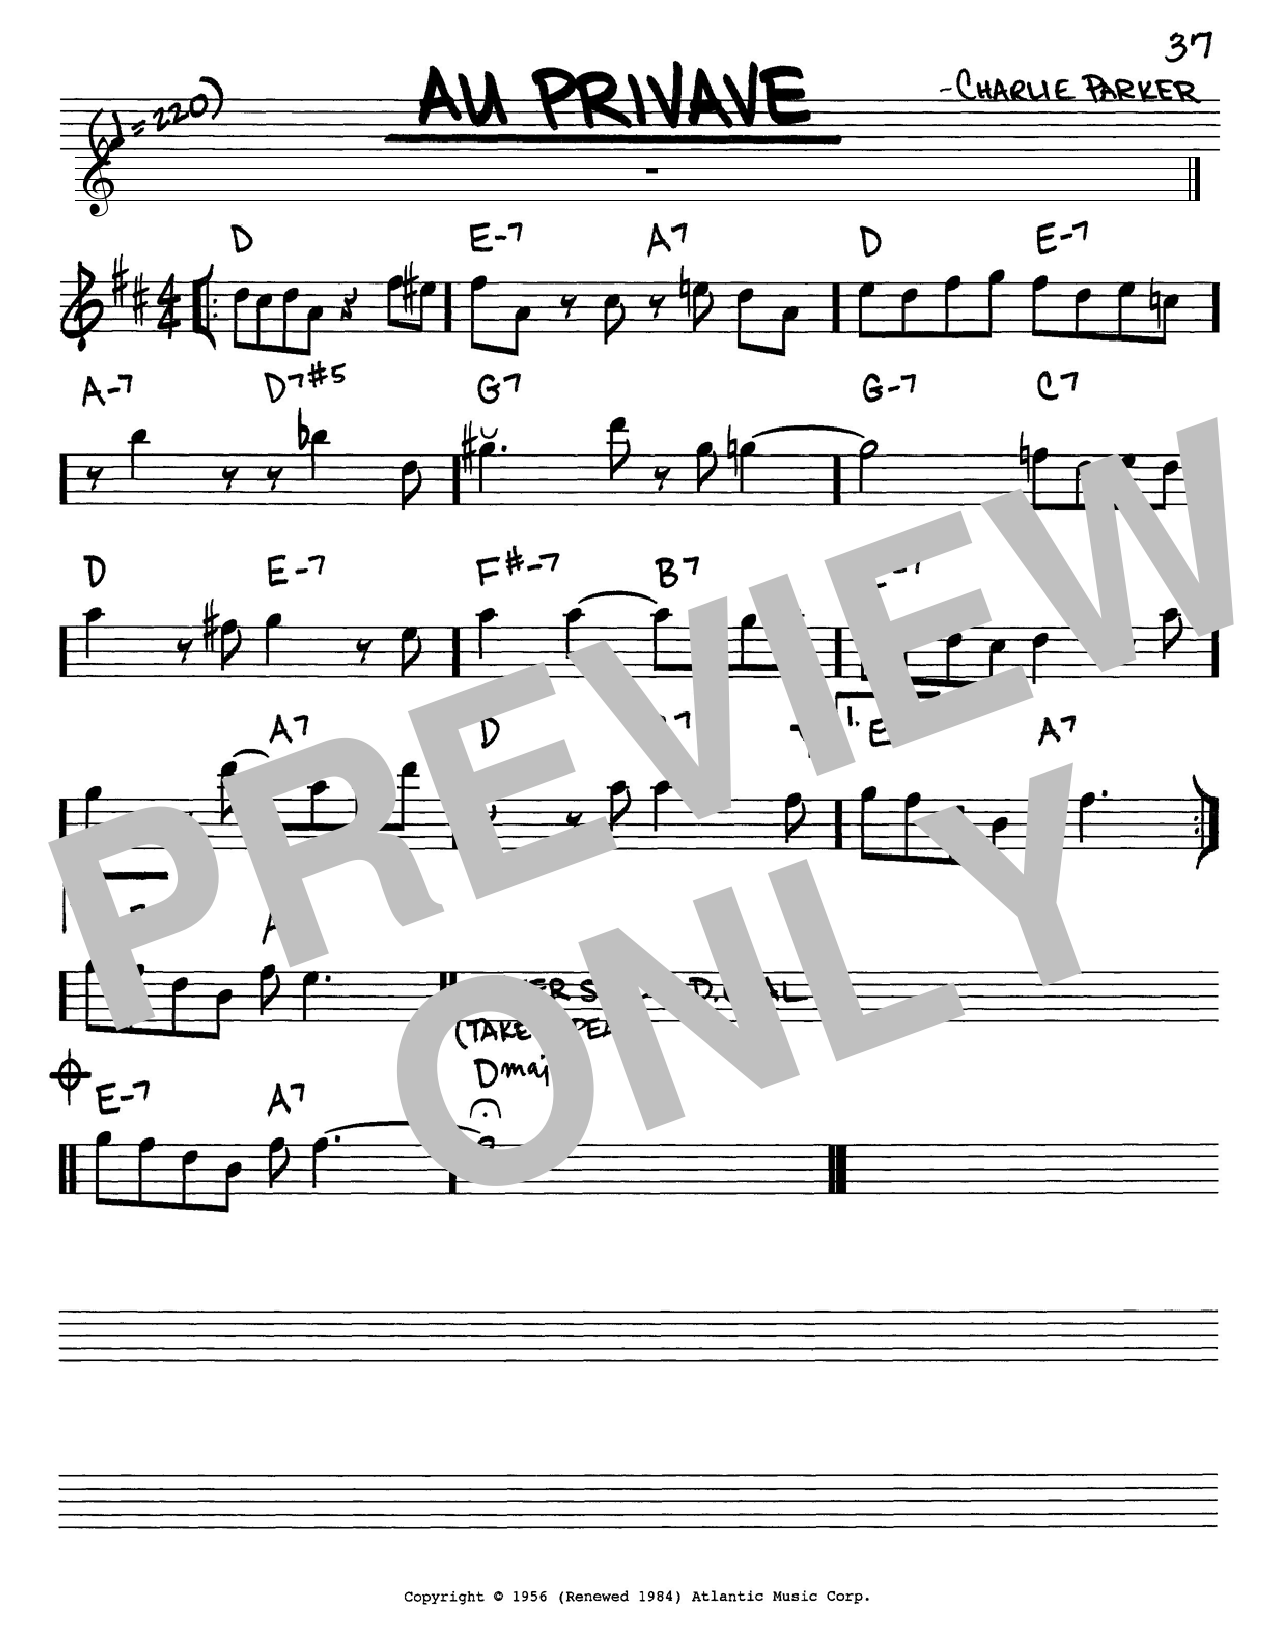 Charlie Parker Au Privave sheet music notes and chords. Download Printable PDF.